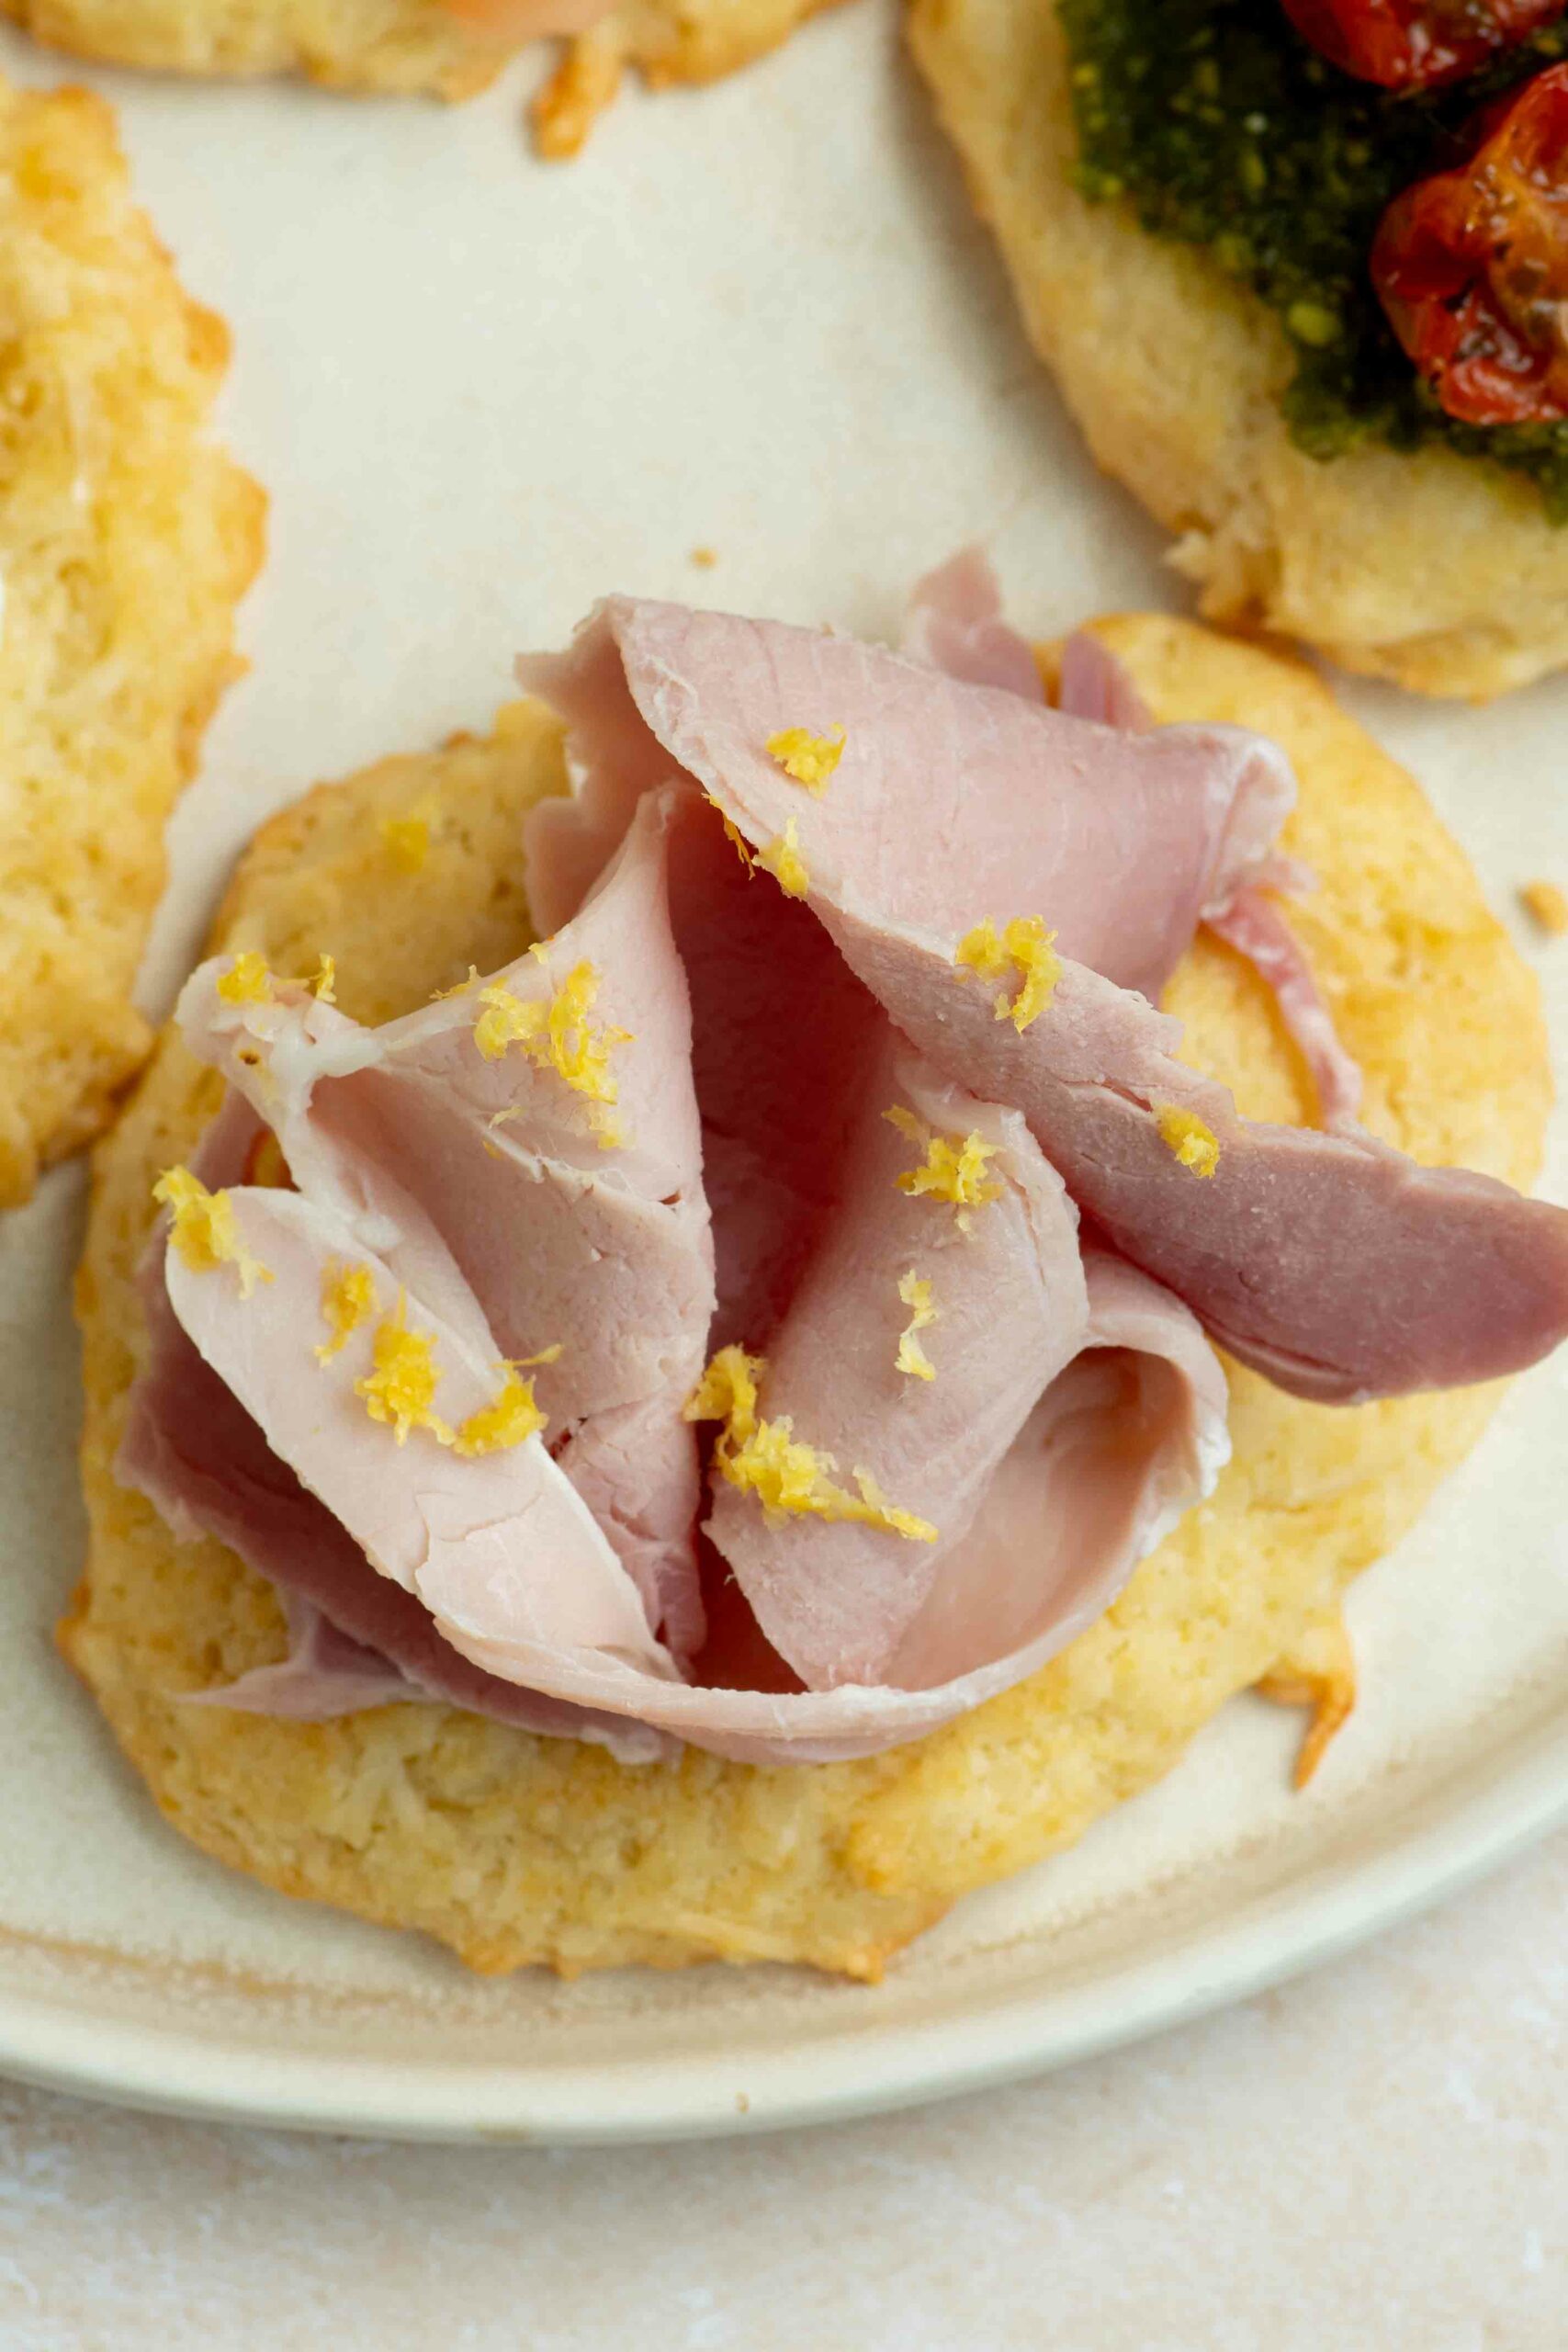 A cookie placed on a plate and garnished with a slice of ham and lemon zest.